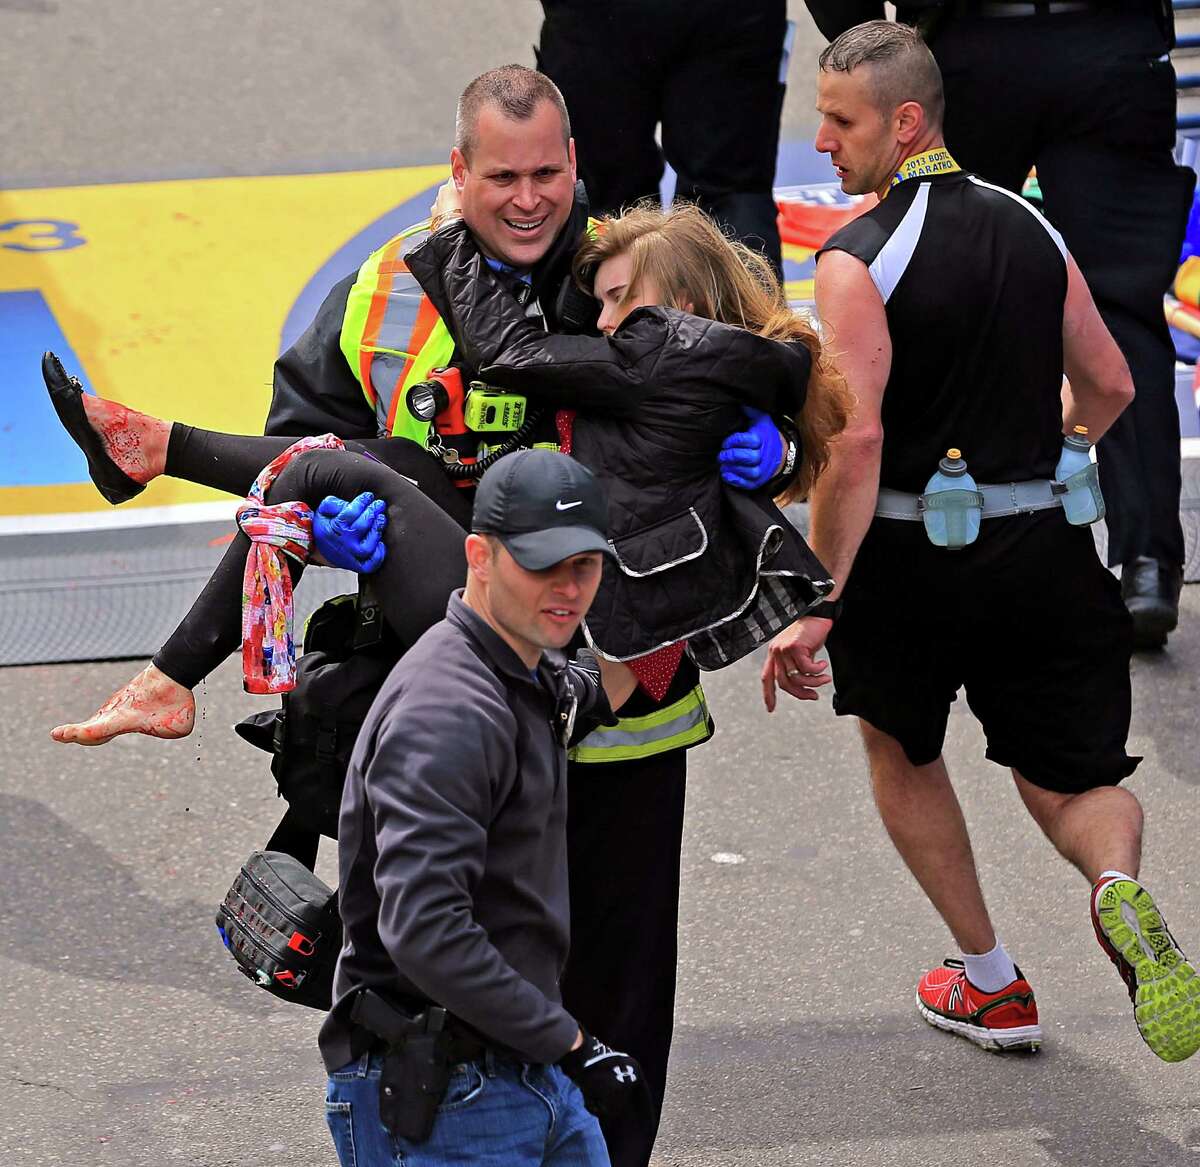 Emergency personnel aid Victoria McGrath, a Northeastern University student from Weston , Conn. after she was injured in the explosions near the finish line at the Boston Marathon on April 15, 2013.